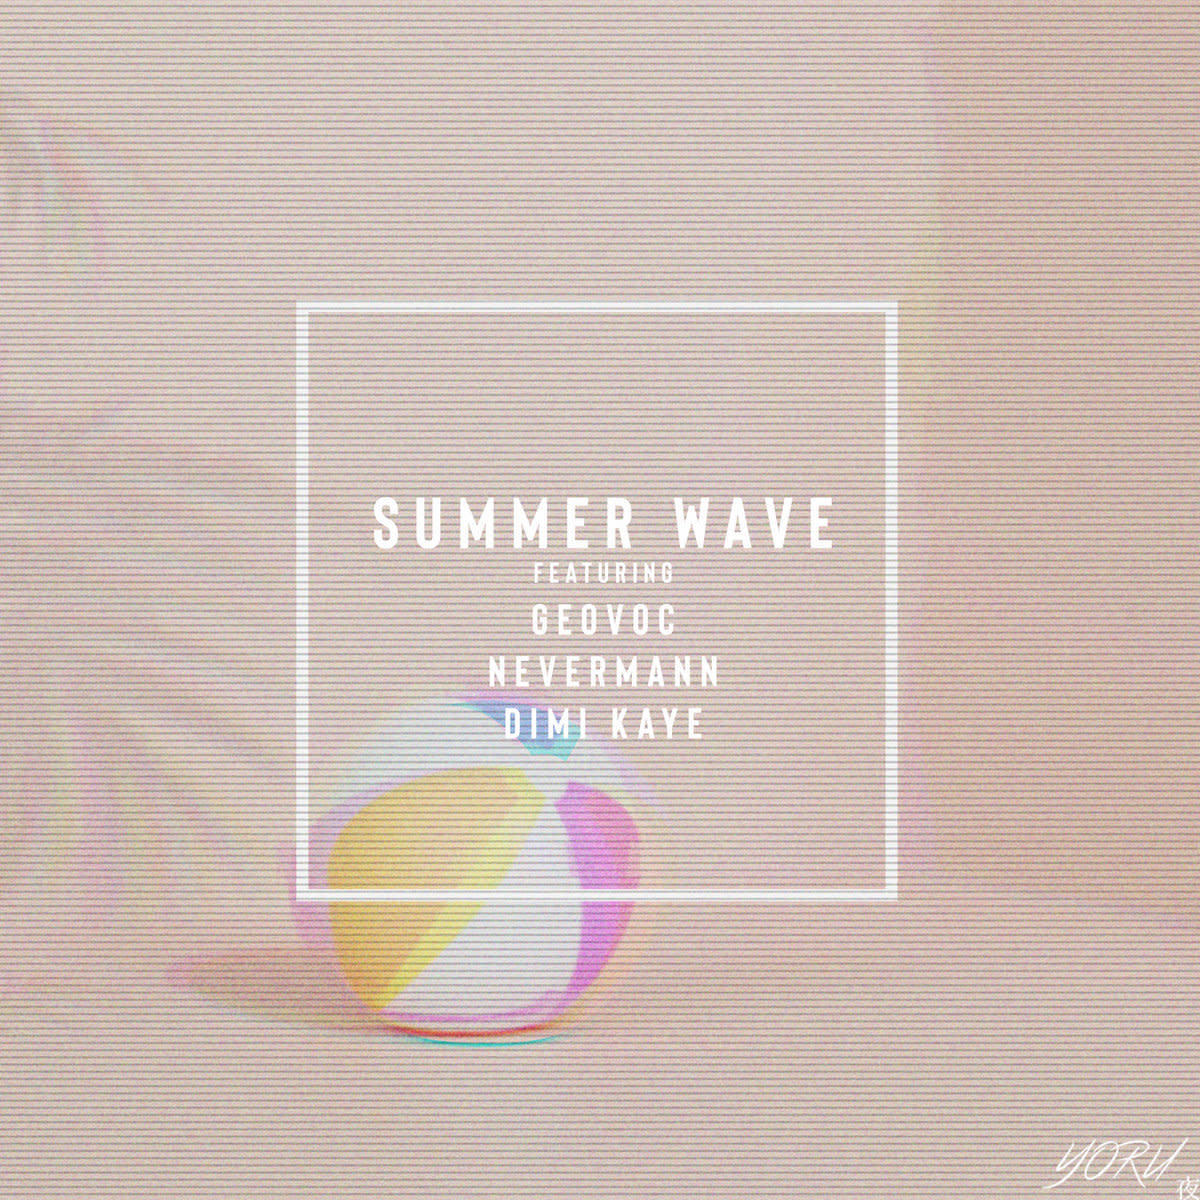 synth-single-review-summer-wave-by-yoru-with-geovoc-nevermann-and-dimi-kaye